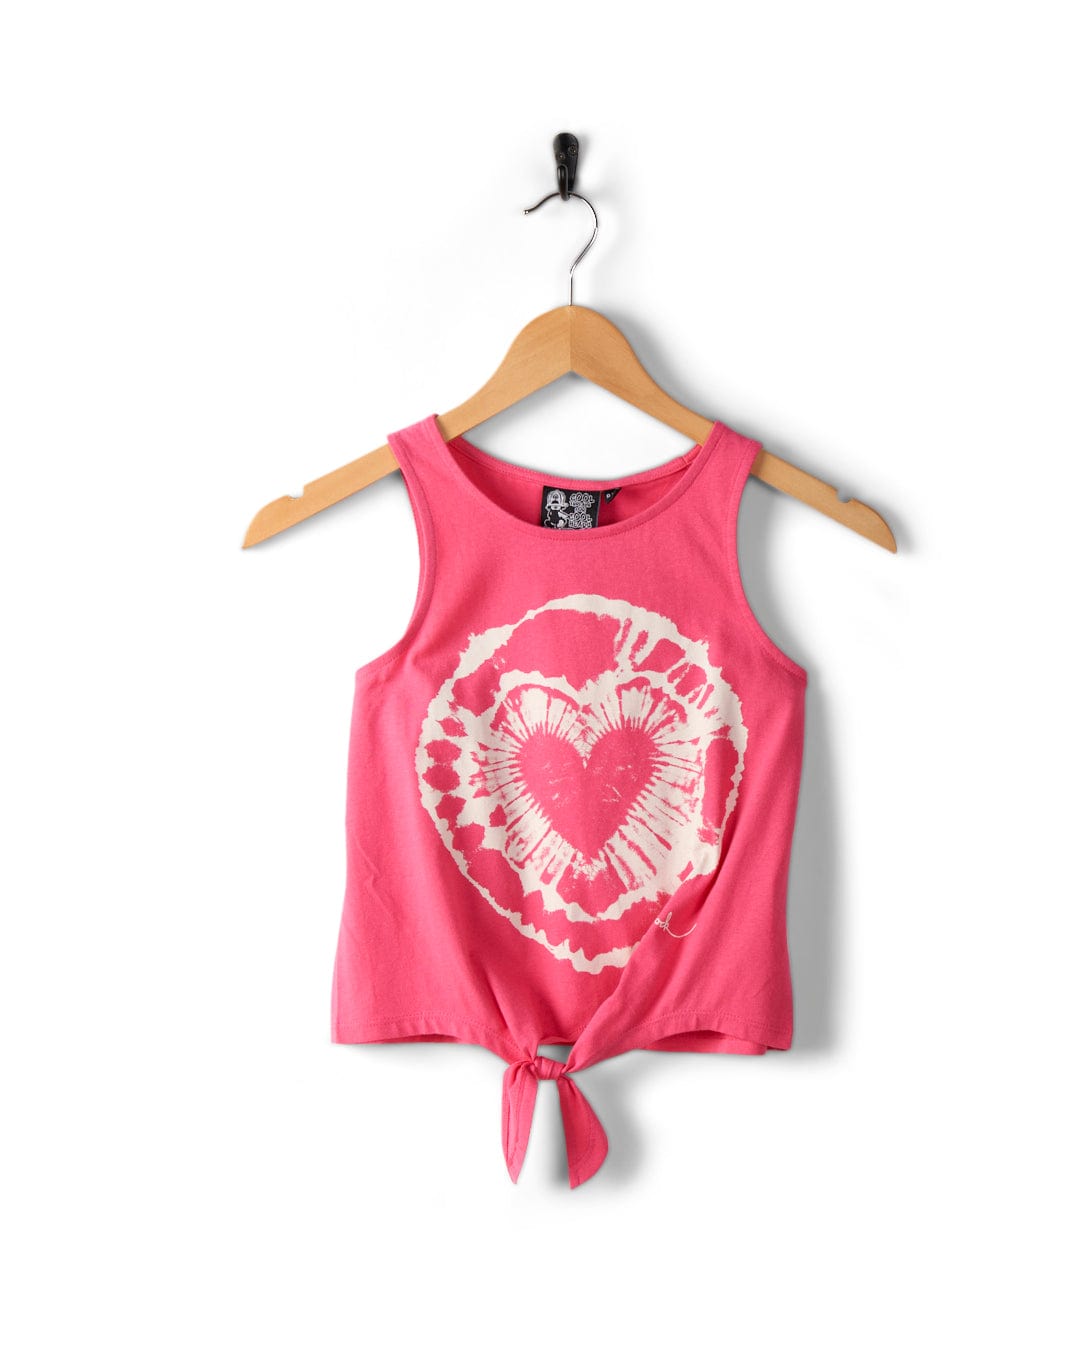 A Saltrock Tie Dye Heart - Kids Tie Front Vest - Pink made of soft cotton, featuring a heart-shaped tie-dye pattern on the front, hanging elegantly on a wooden hanger with a bottom tie detail.